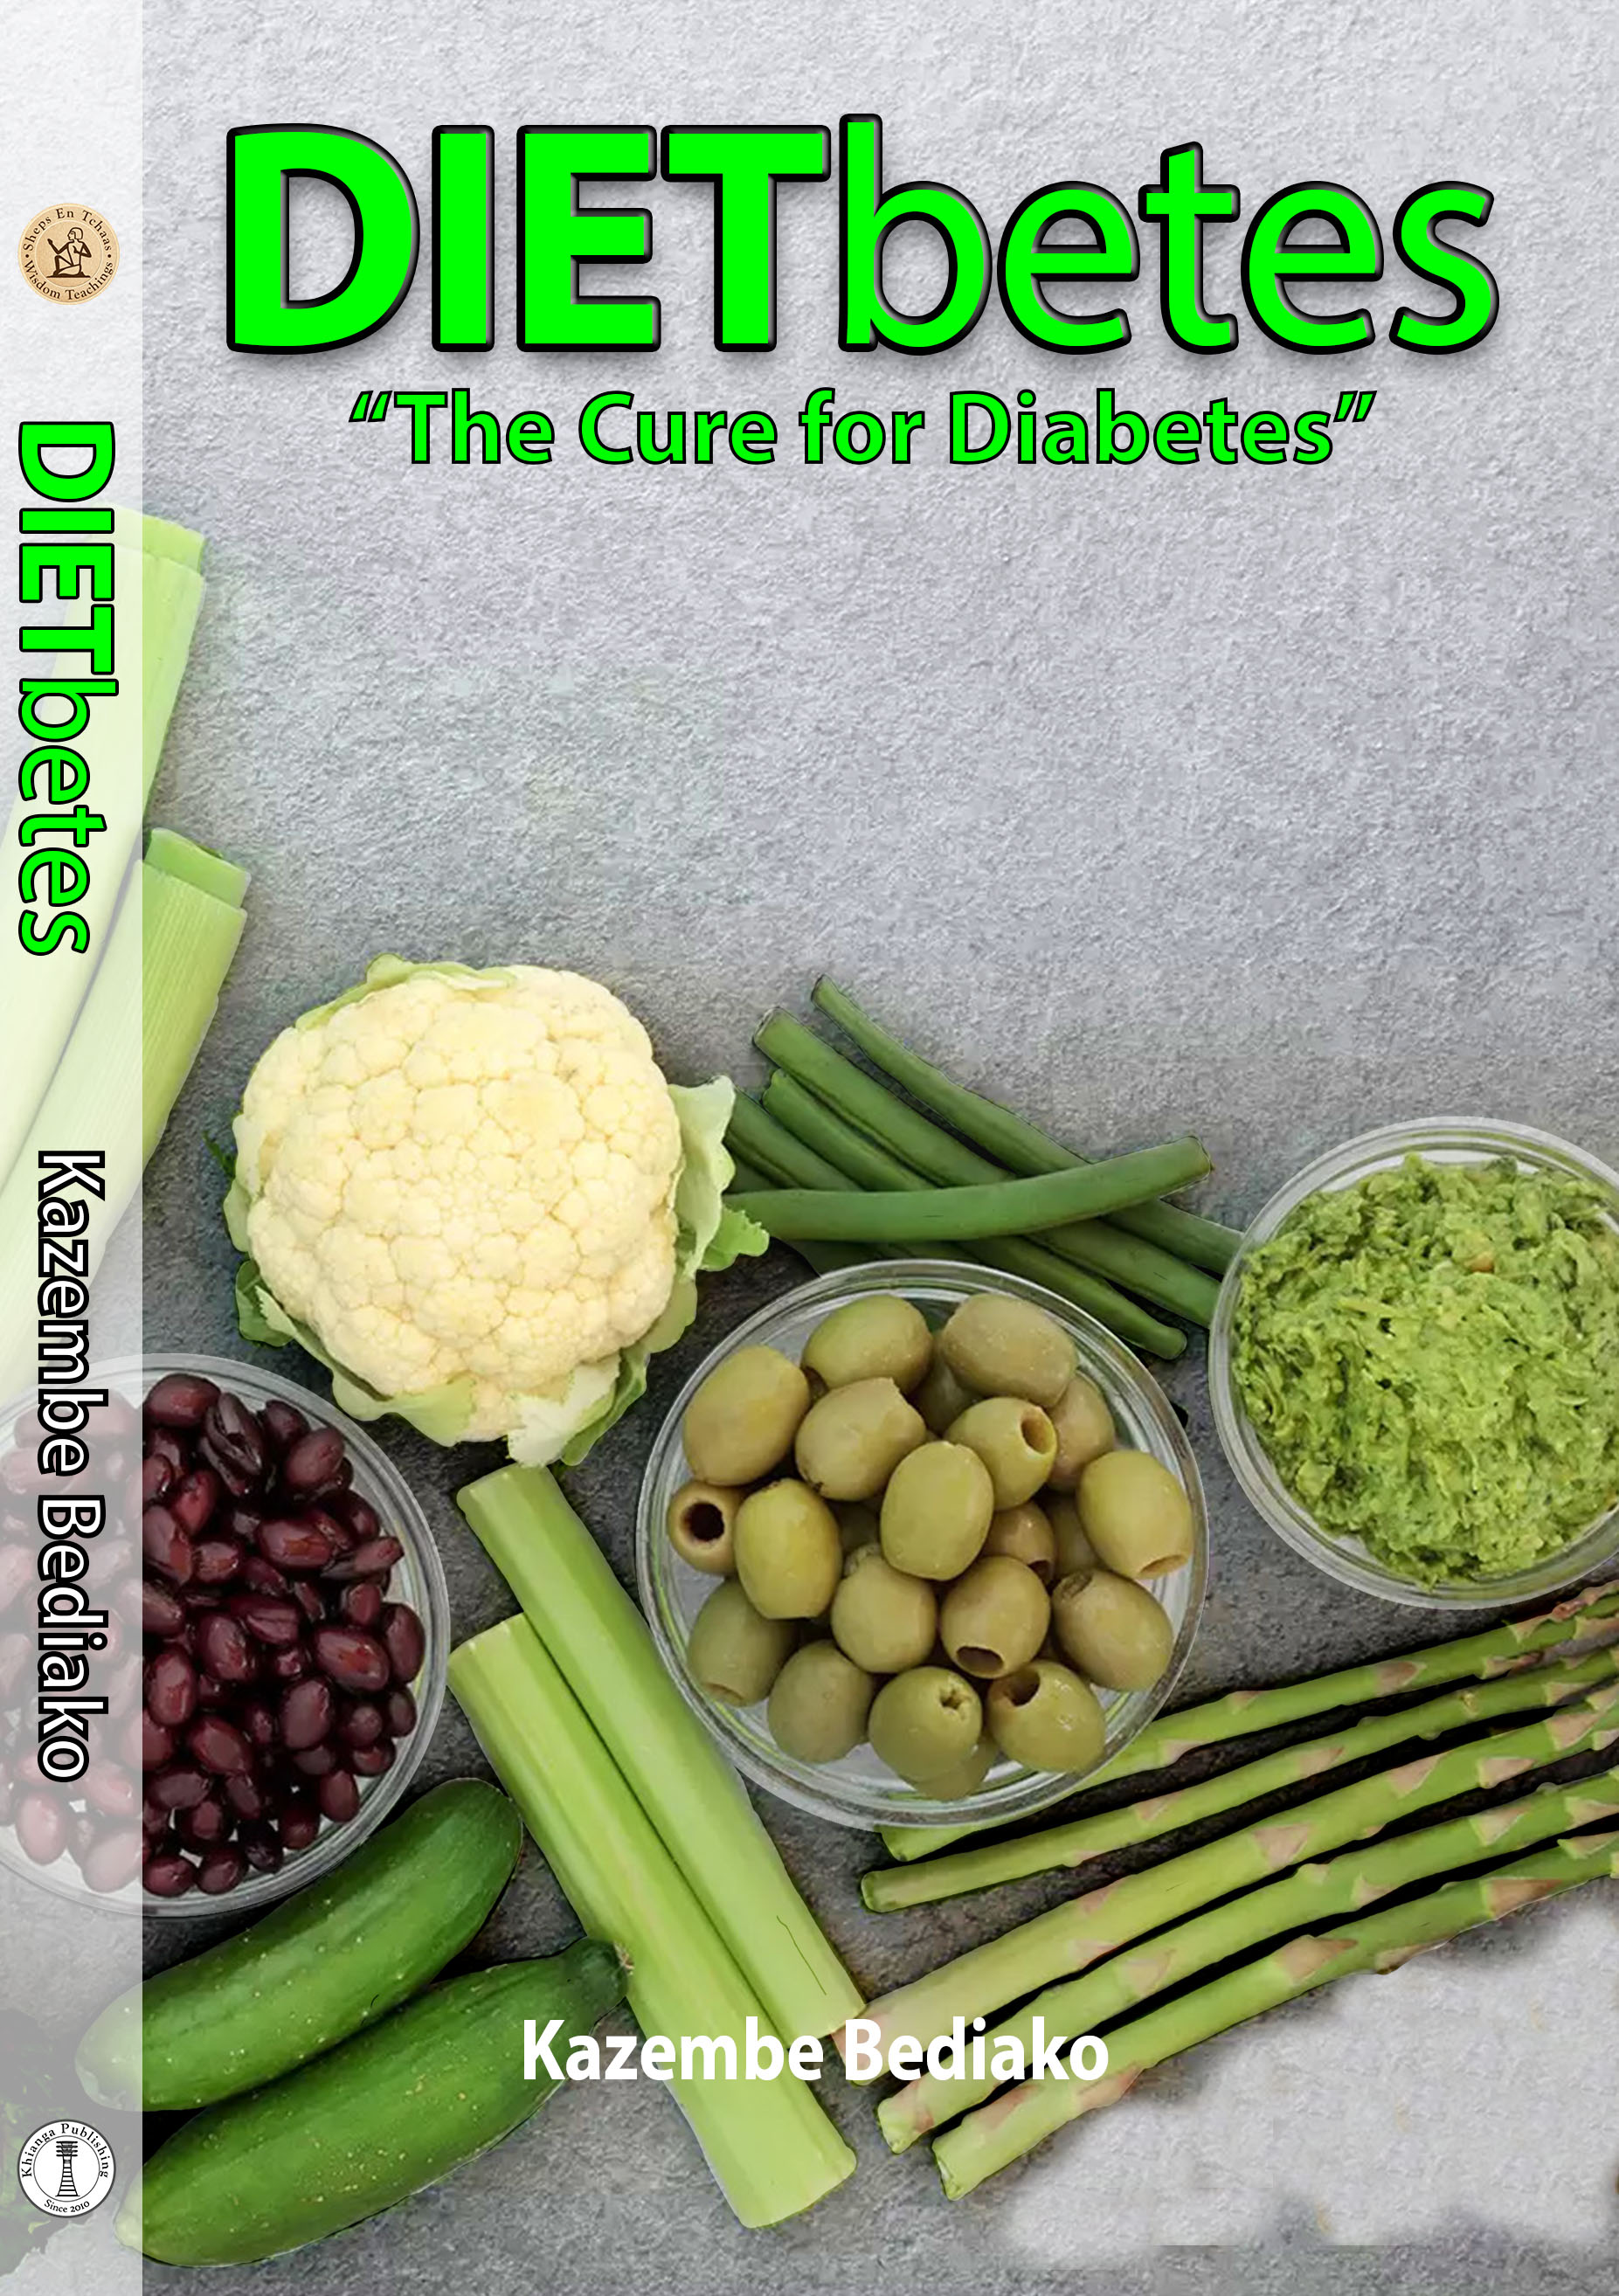 Dietbetes the Cure for Diabetes